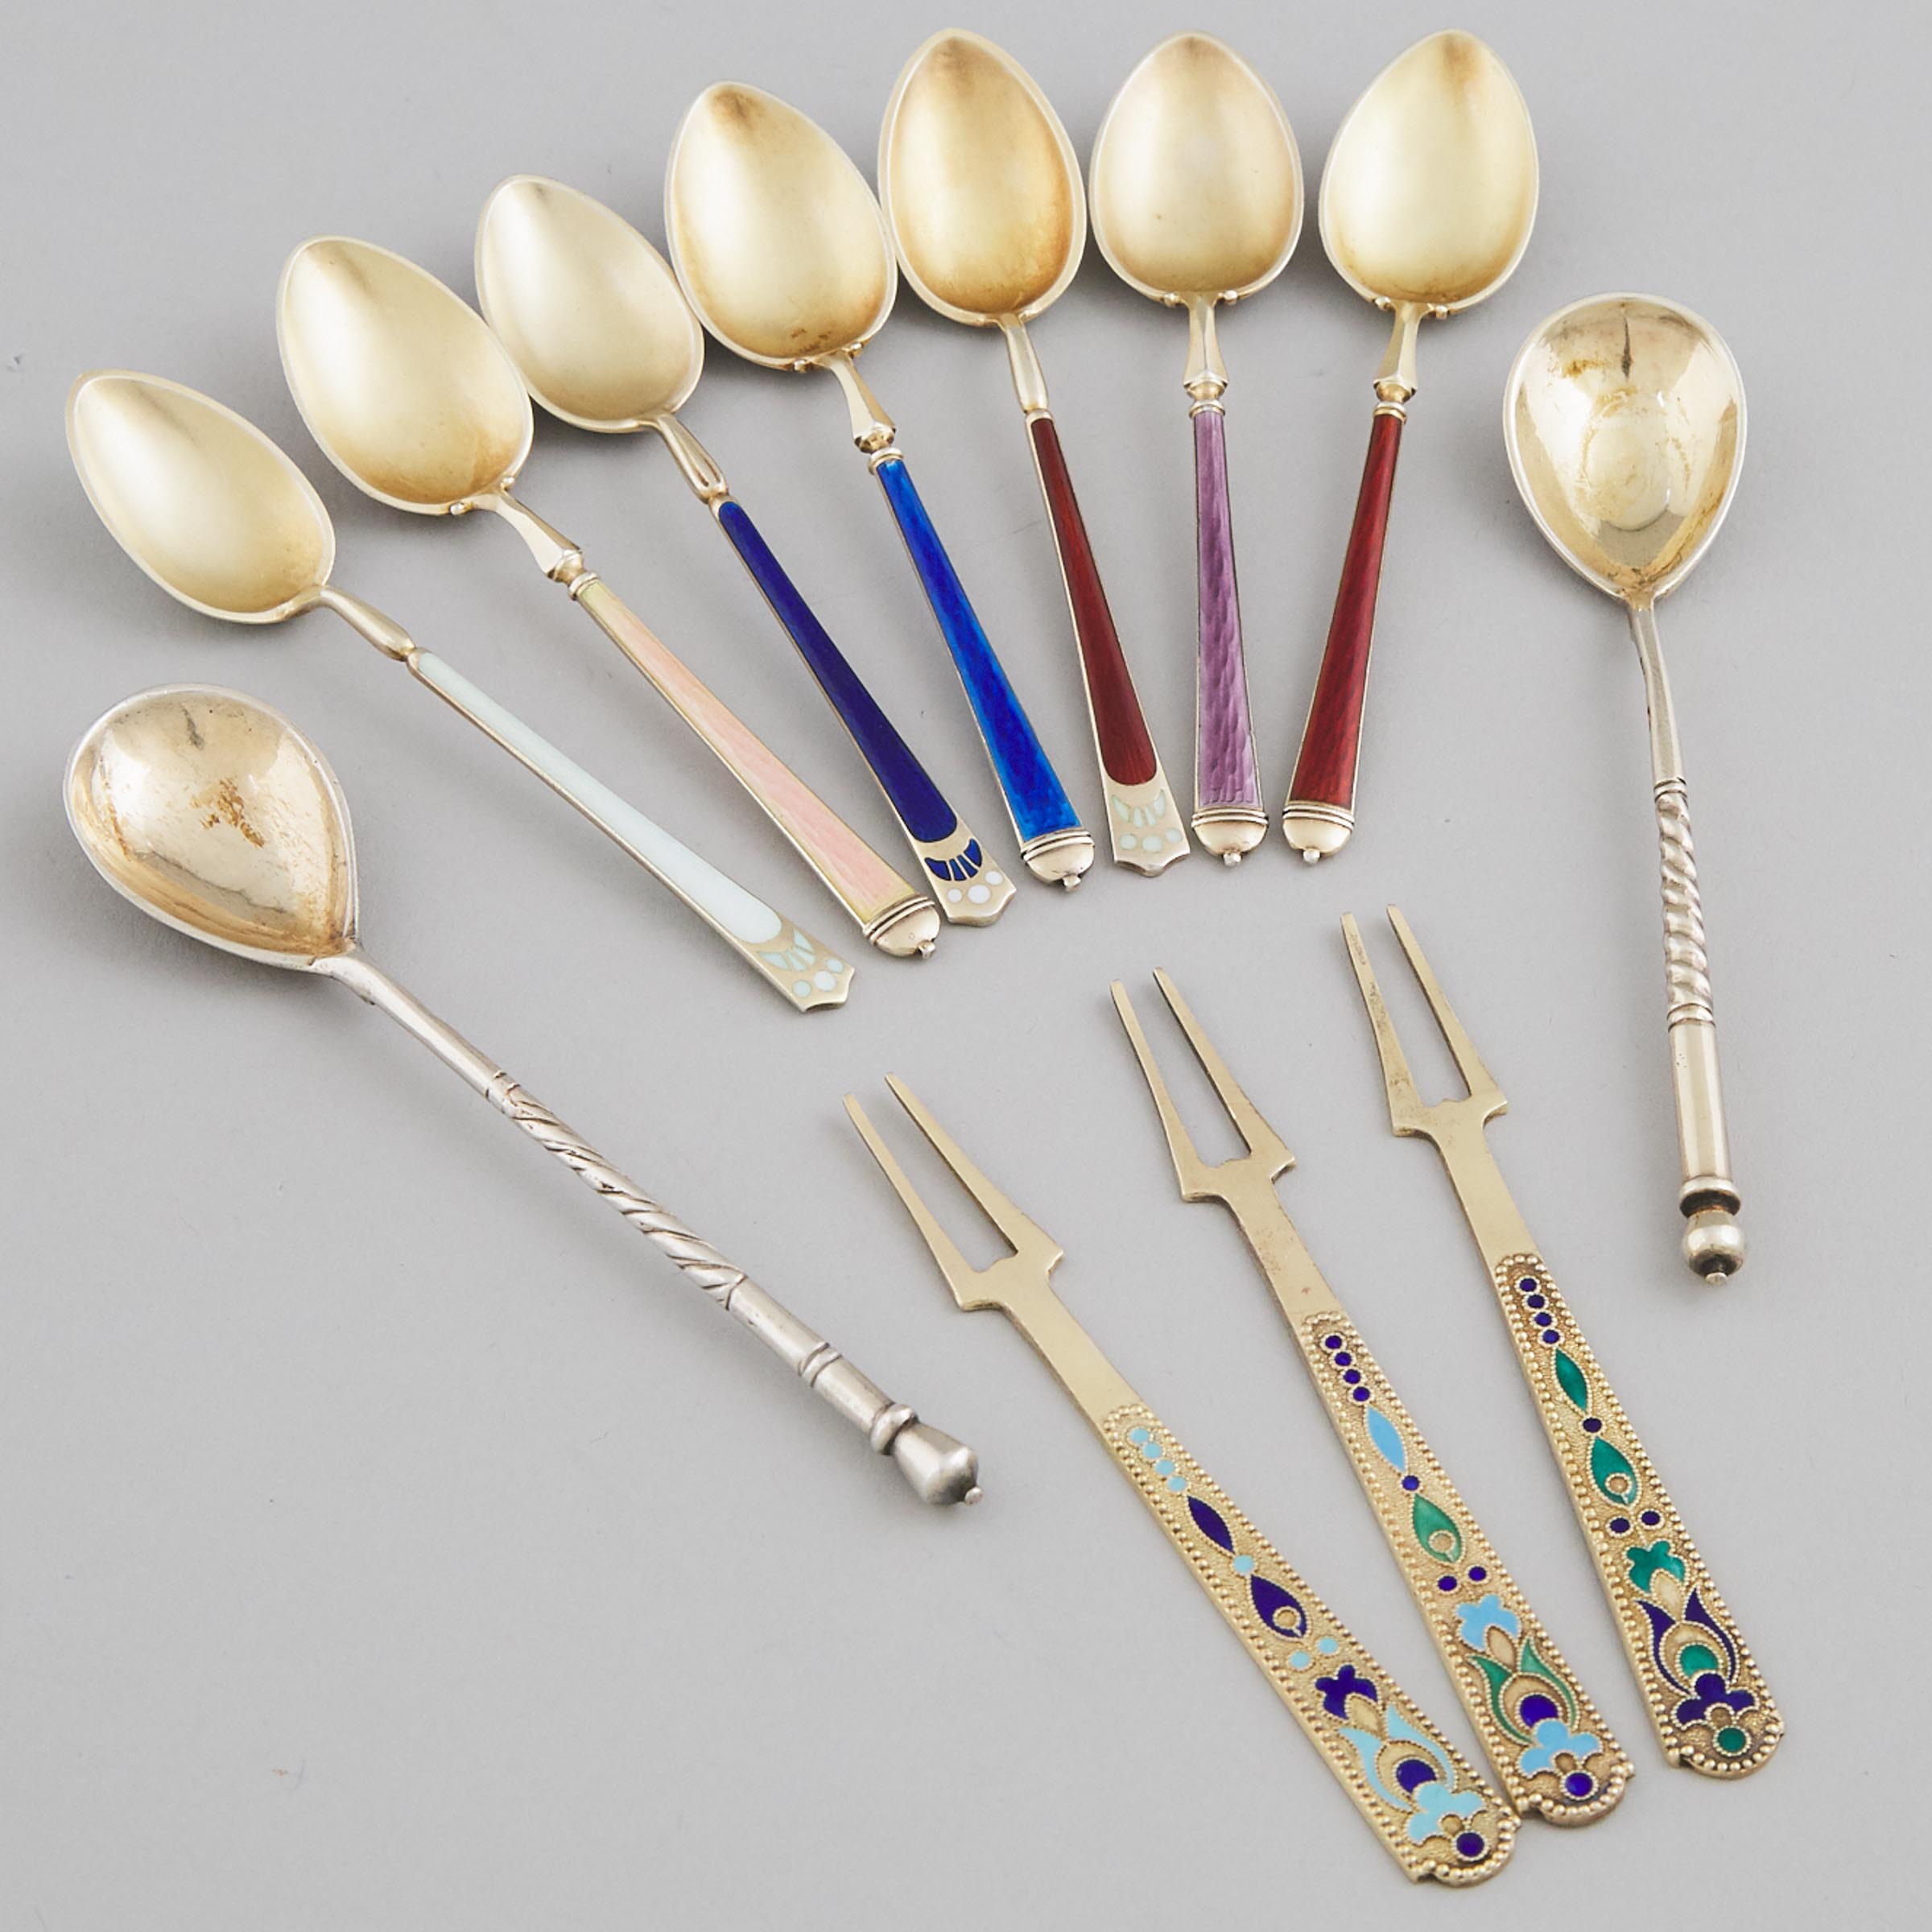 Nine Russian and Norwegian Silver-Gilt and Enameled Small Spoons and Three Forks, 20th century